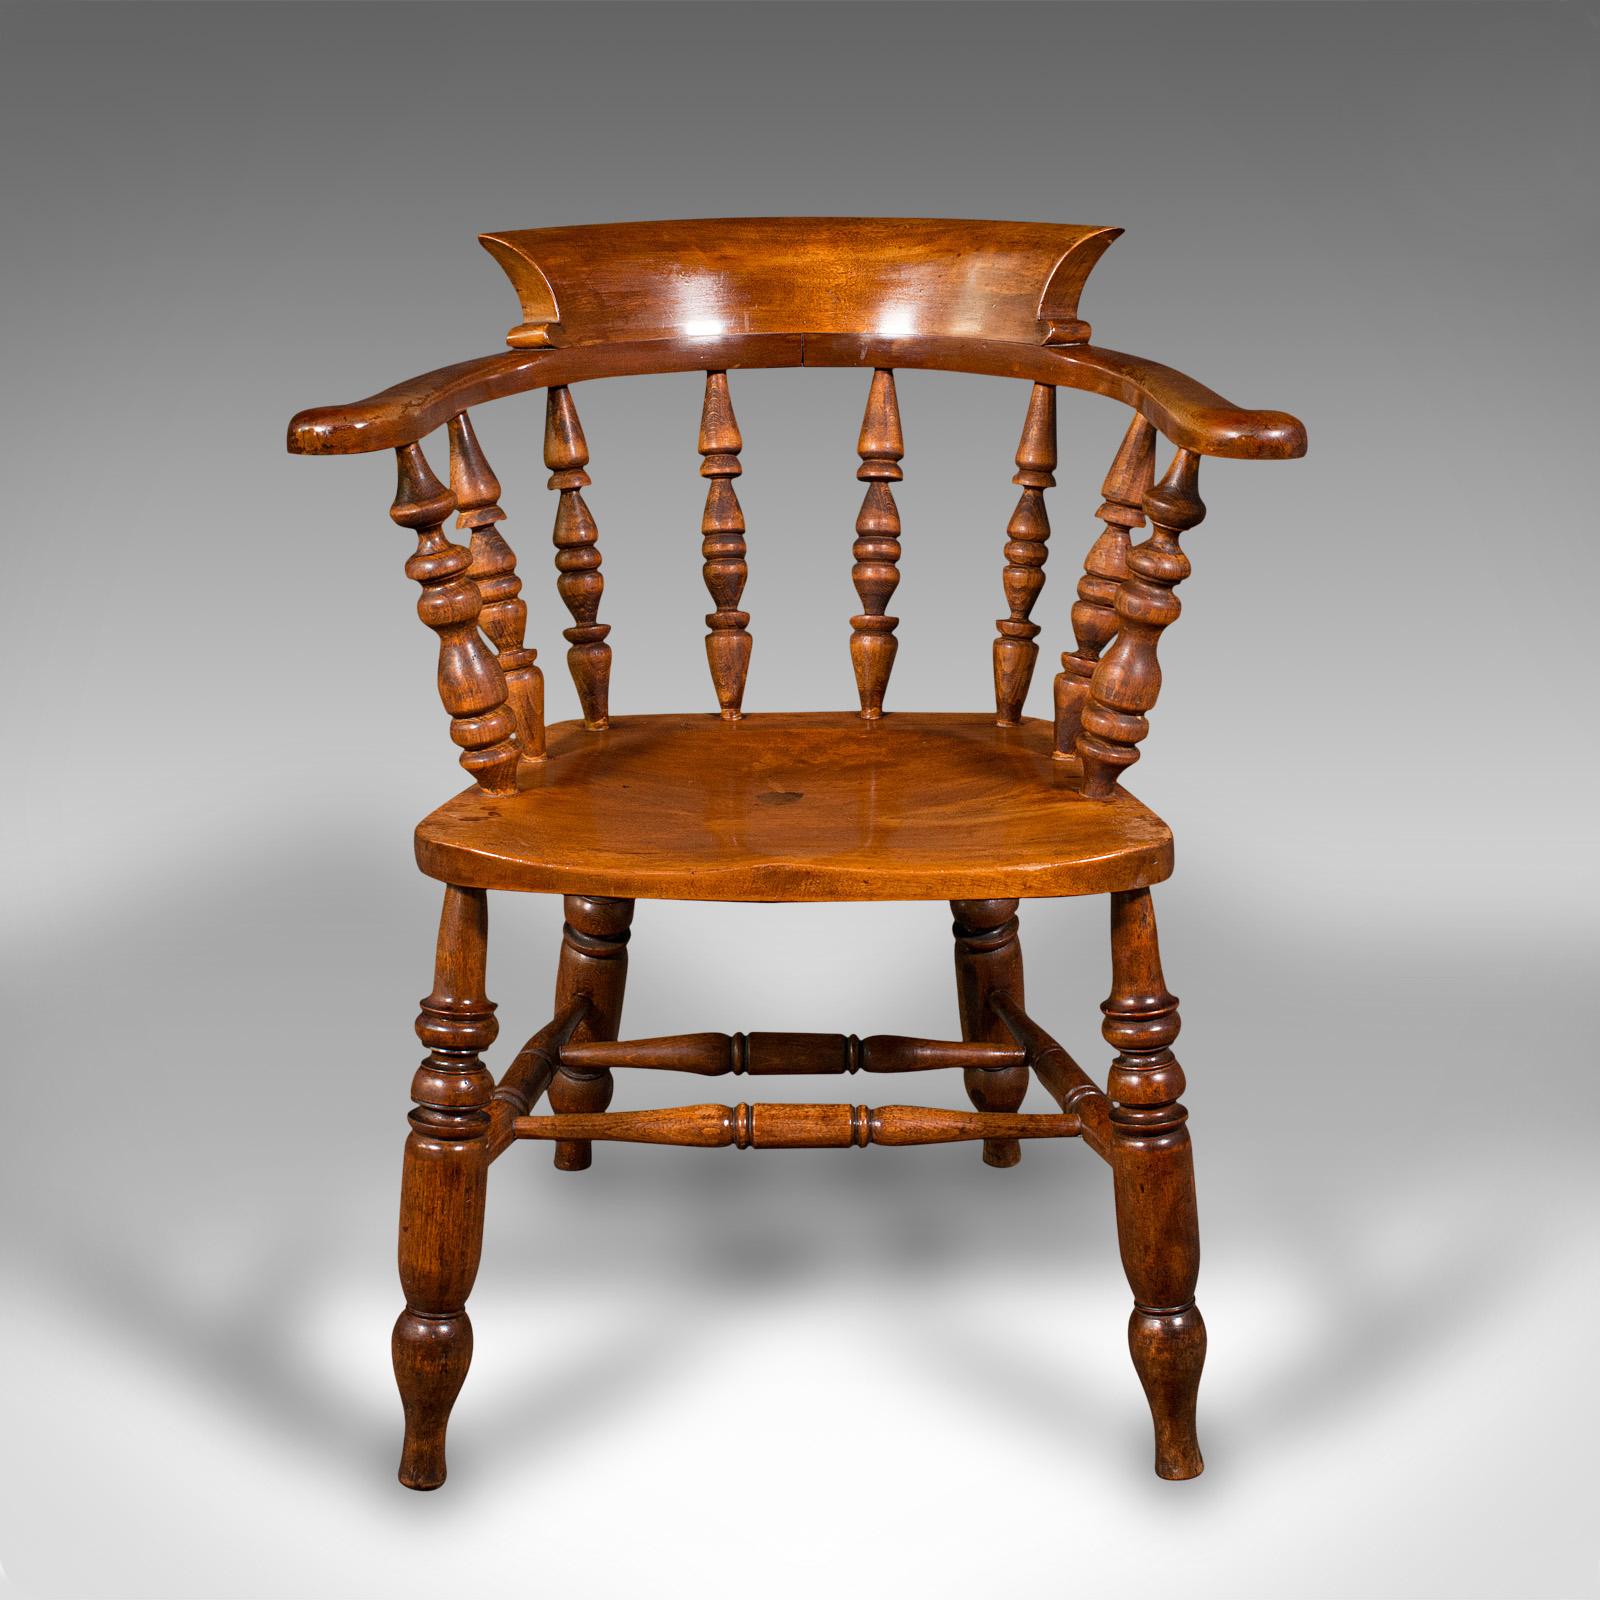 This is an antique elbow chair. An English, beech and fruitwood smoker's bow or captain's chair, dating to the late Victorian period, circa 1880.

Excellent country house appeal with the classic bow form
Displaying a desirable aged patina and in